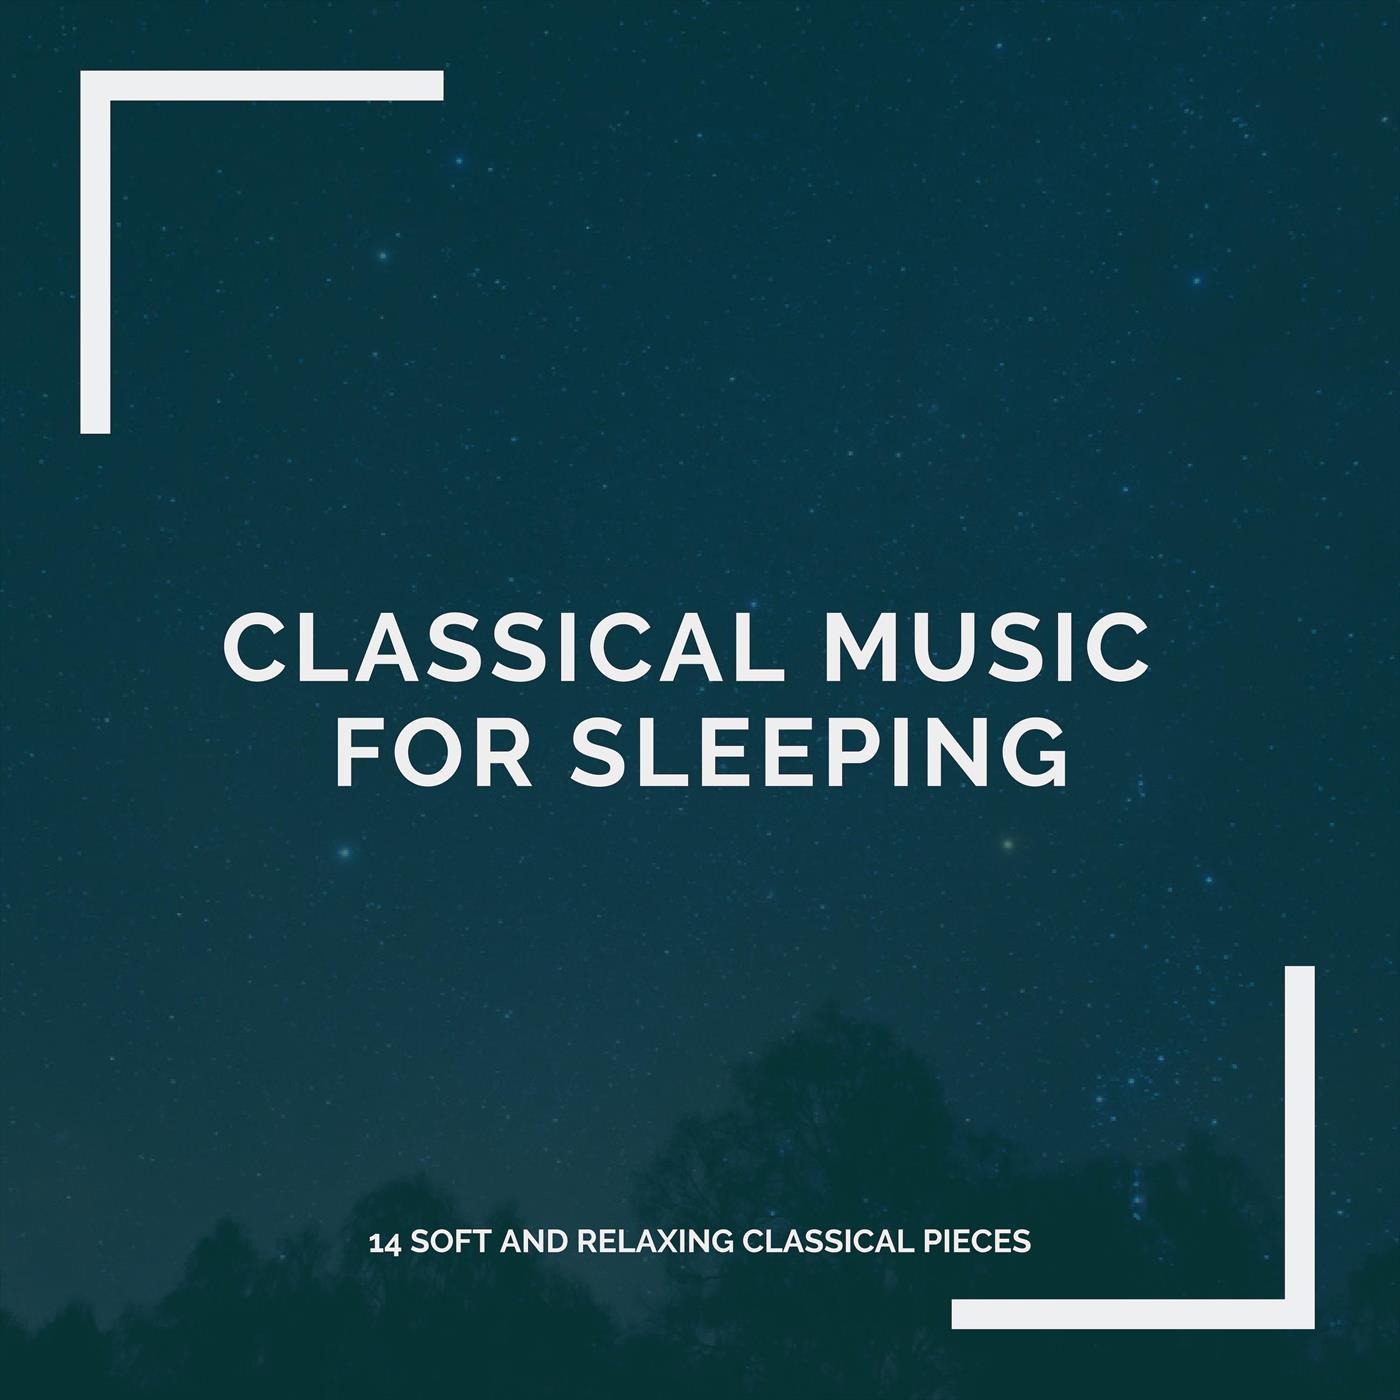 Classical Music for Sleeping: 14 Soft and Relaxing Classical Pieces